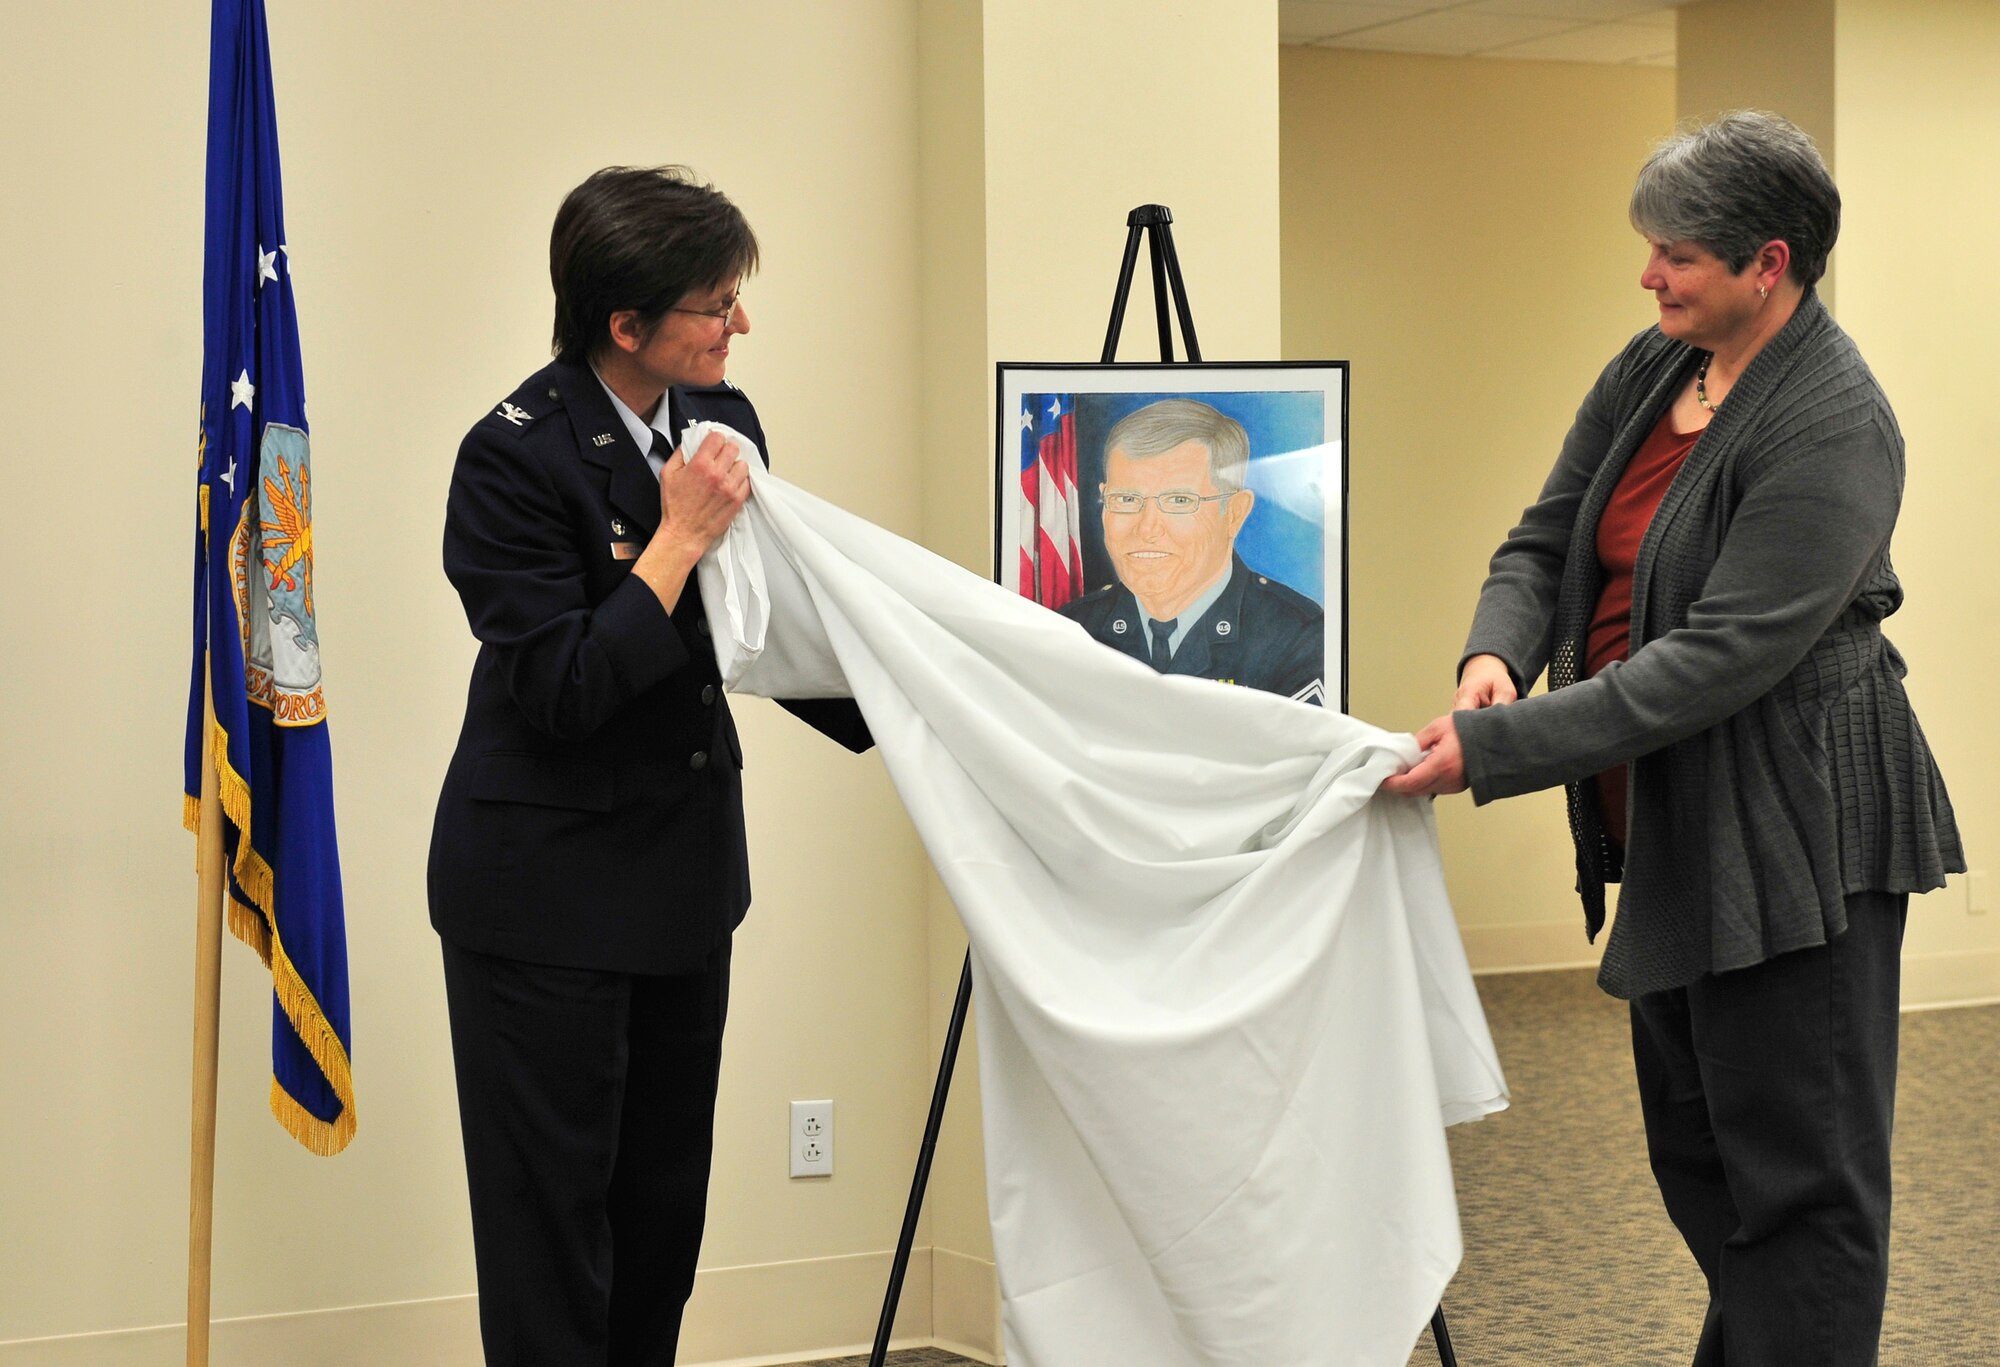 Col. Jill Sterling, 375th Medical Group commander and Gloria Lima unveil a painting of retired chief Rodney Deltgen during a hospital auditorium dedication ceremony Feb. 10. Lima is the daughter of Deltgen and the auditorium will be renamed after him. The painting is a gift to her from the 375 MDG. (U.S. Air Force photo/ Staff Sgt. Stephenie Wade)